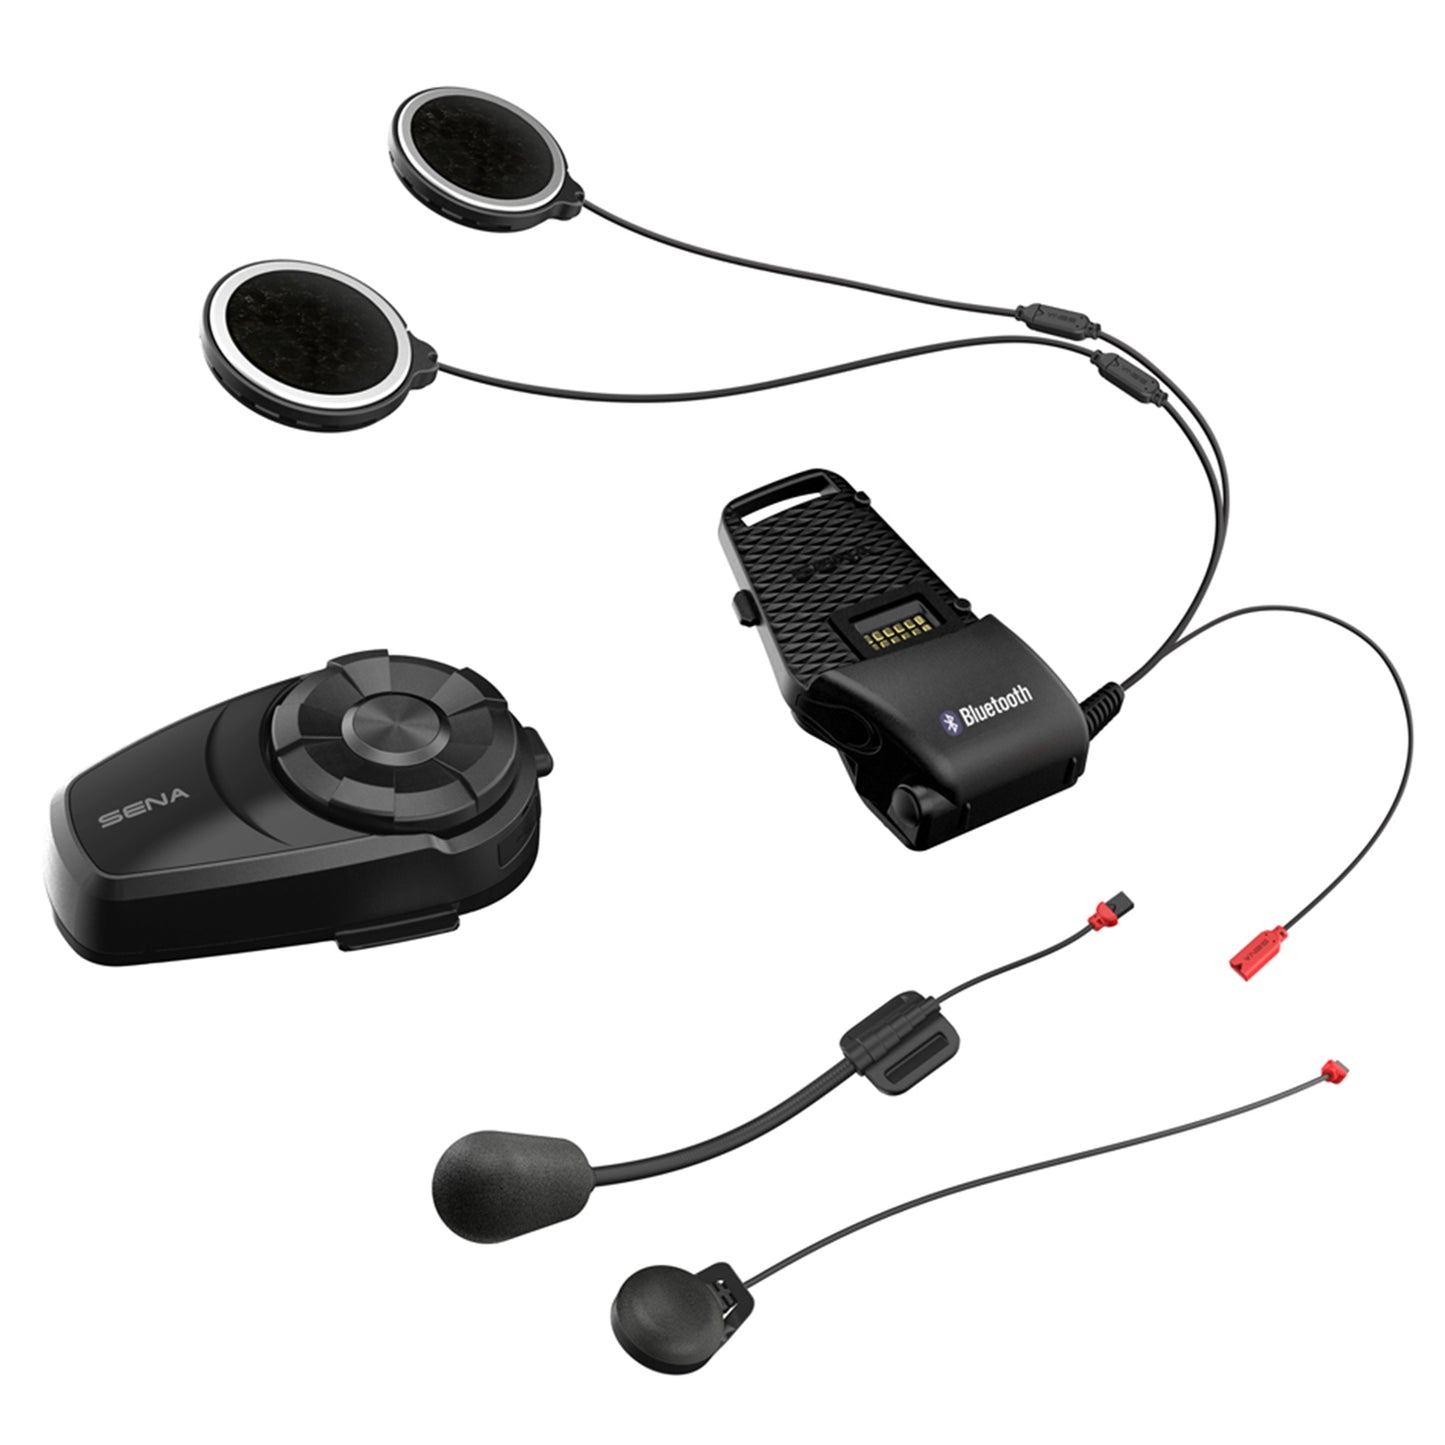 Sena 10S-01D Motorcycle Bluetooth Communication System - Dual Pack